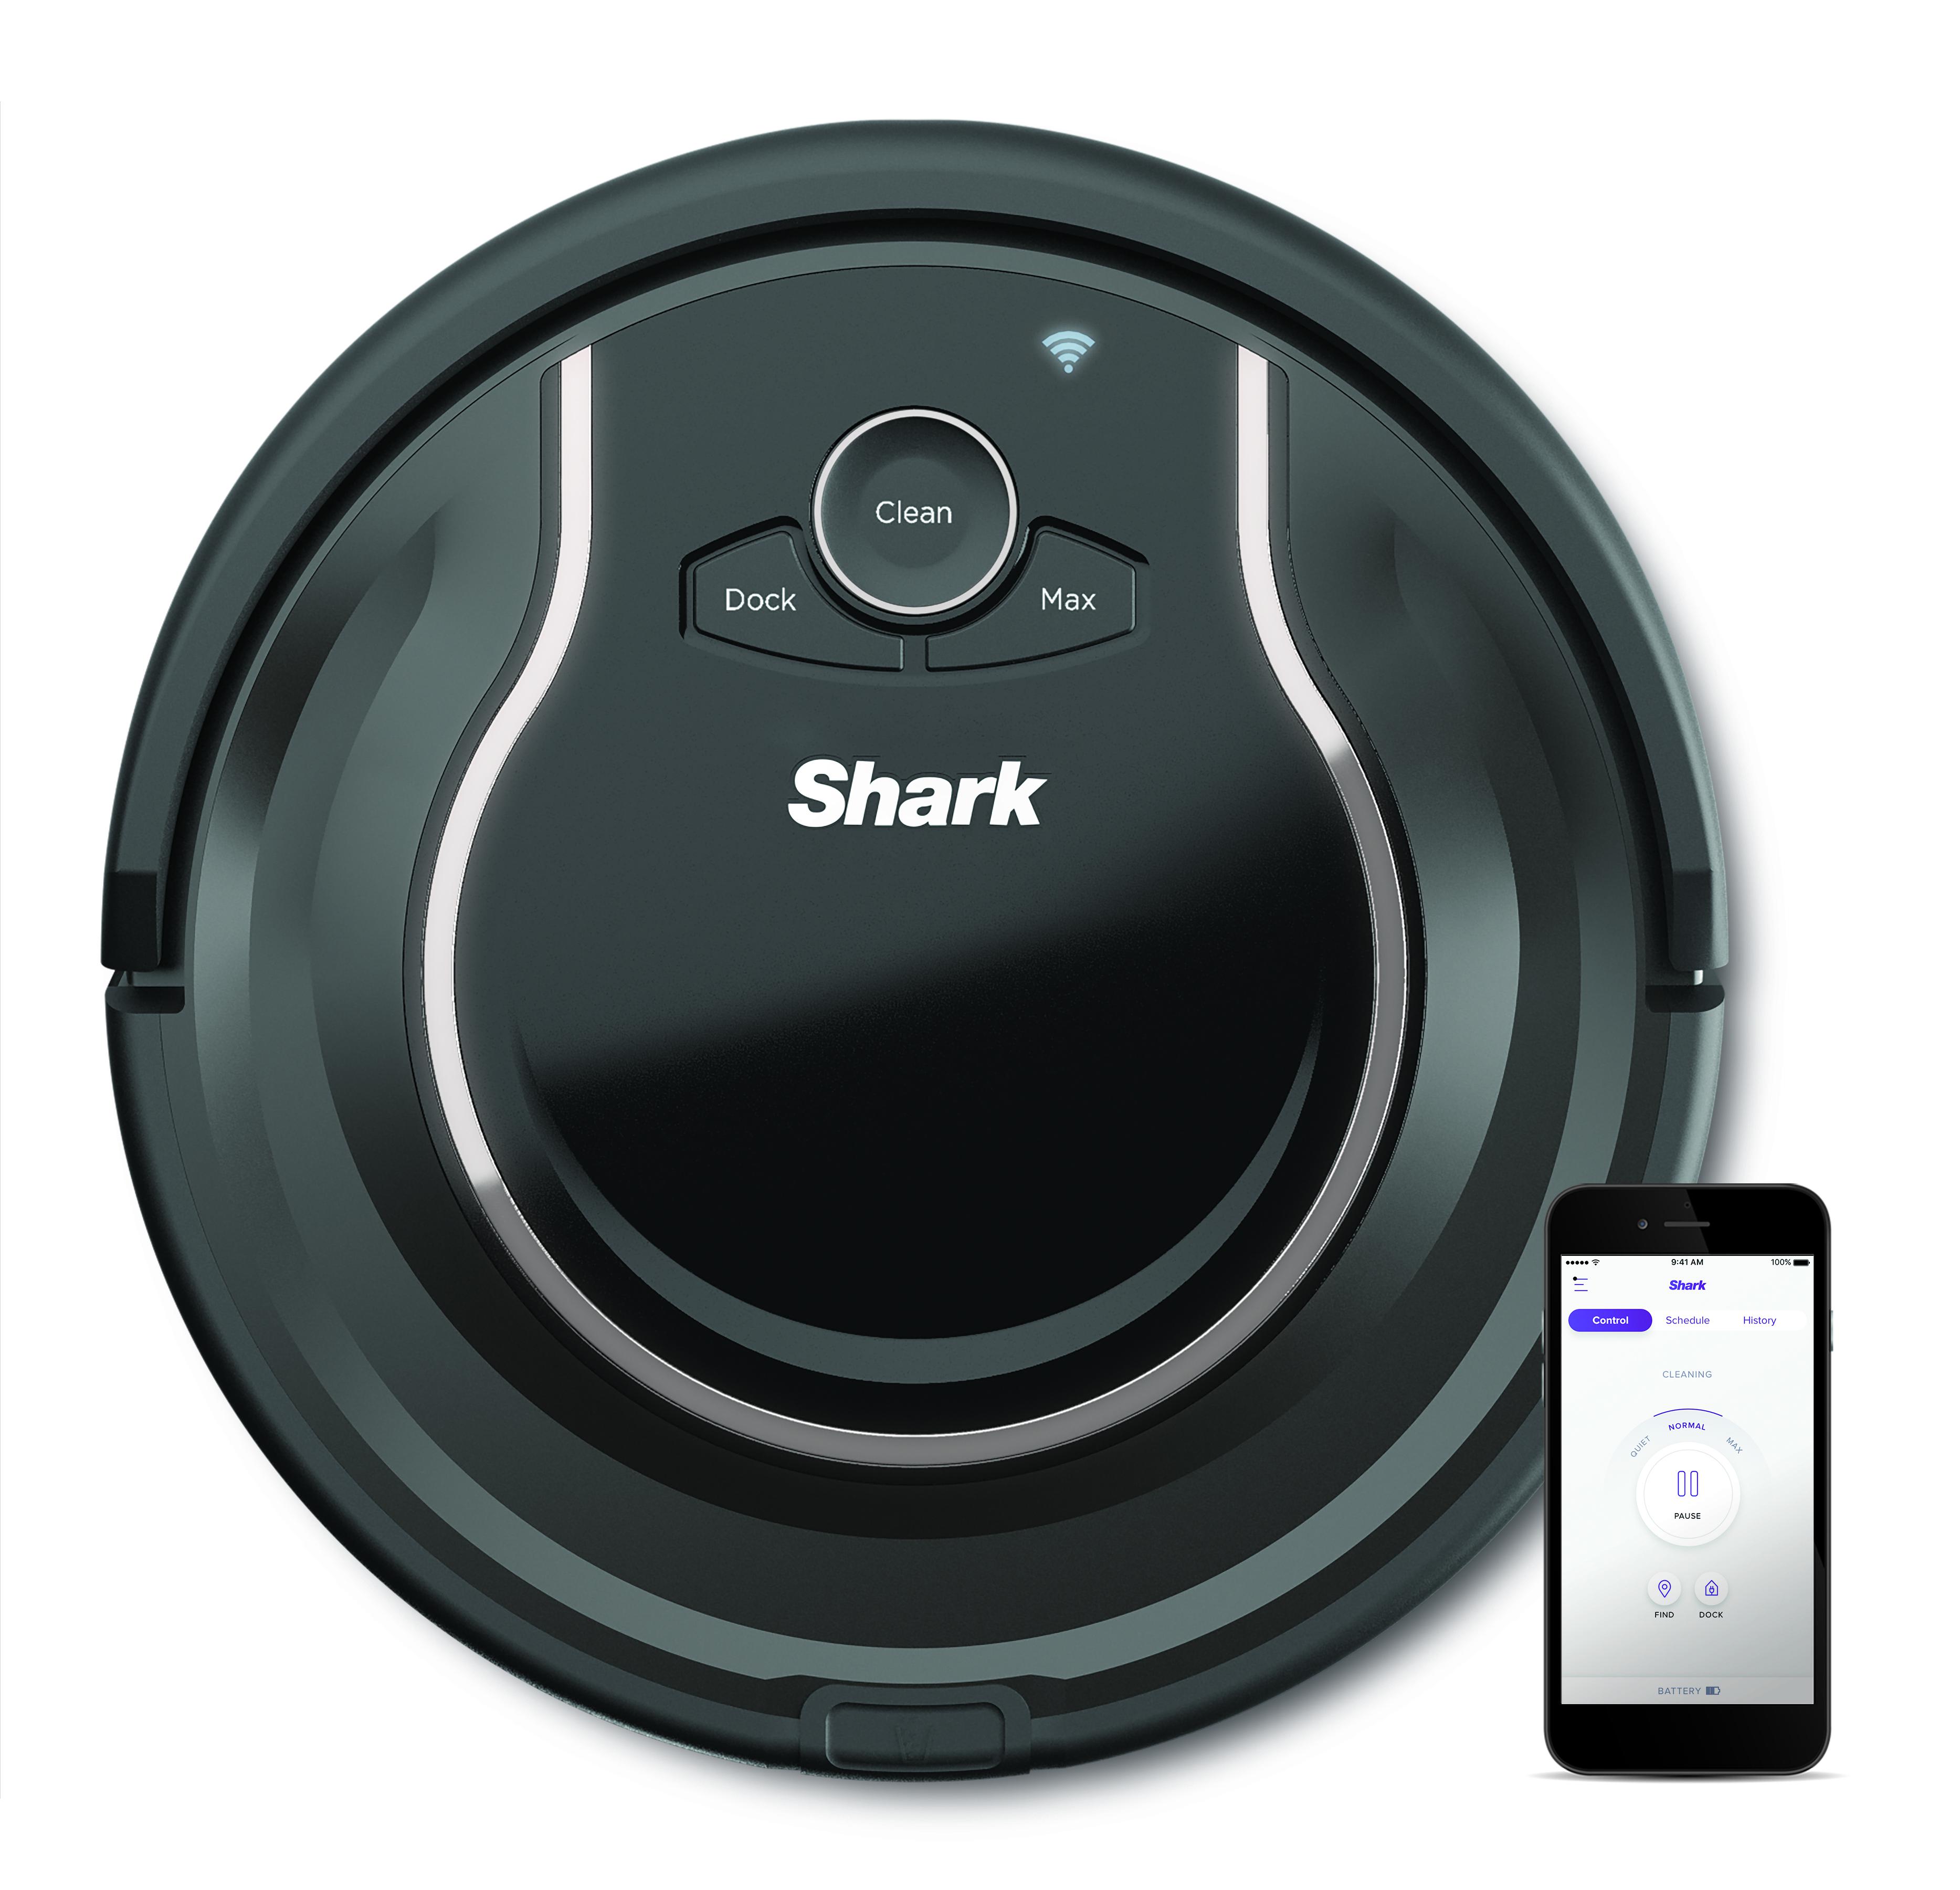 SharkNinja RV750 ION ROBOT 750 Vacuum with Wi-Fi Connectivity + Voice Control, Works - image 1 of 6